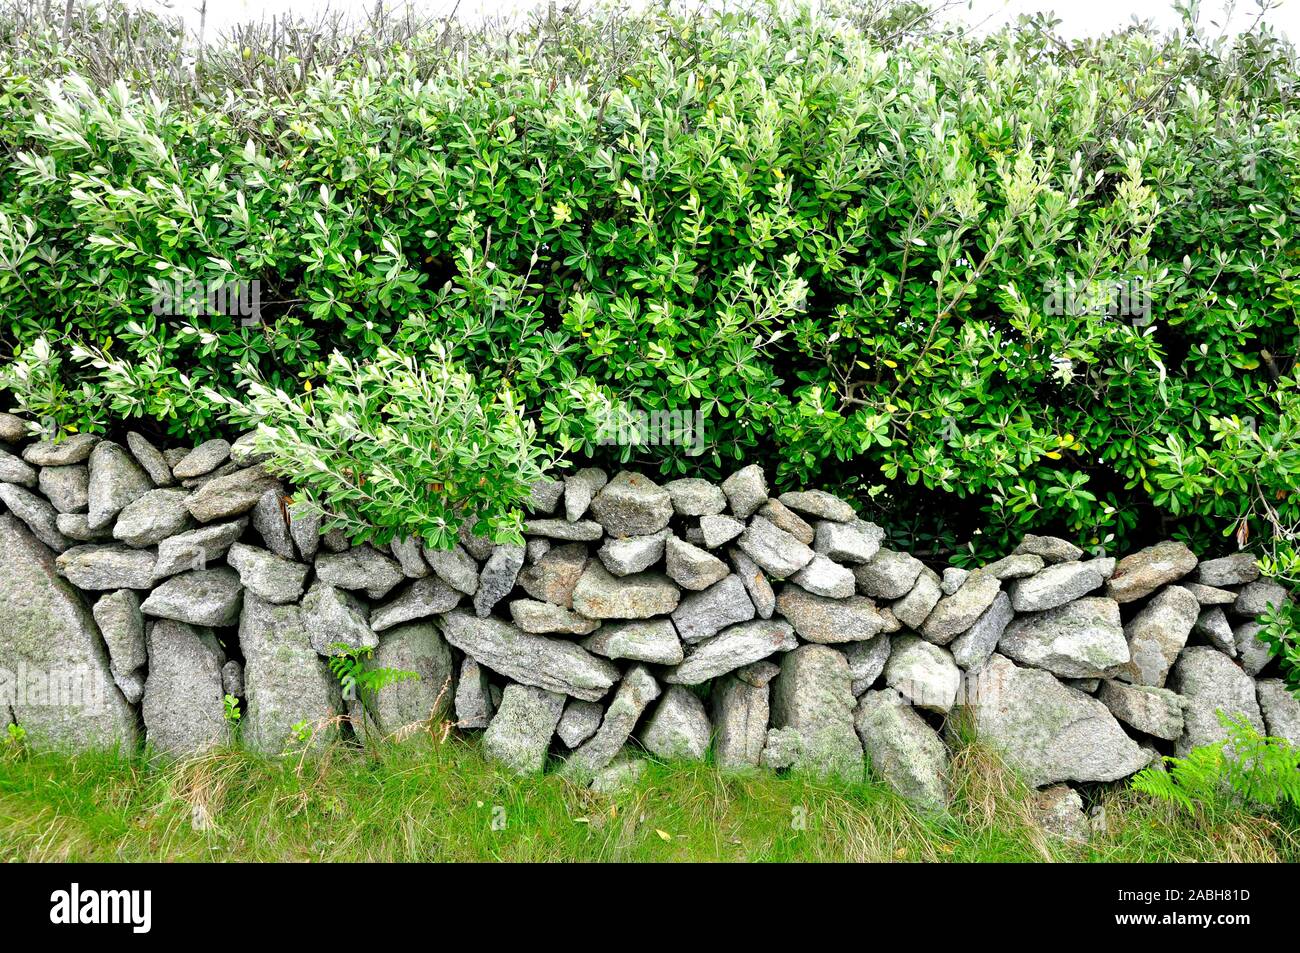 Granite dry stone wall on St Mary's, Isles of Scilly.Cornwall, UK. With pittosporum hedge behind. Stock Photo